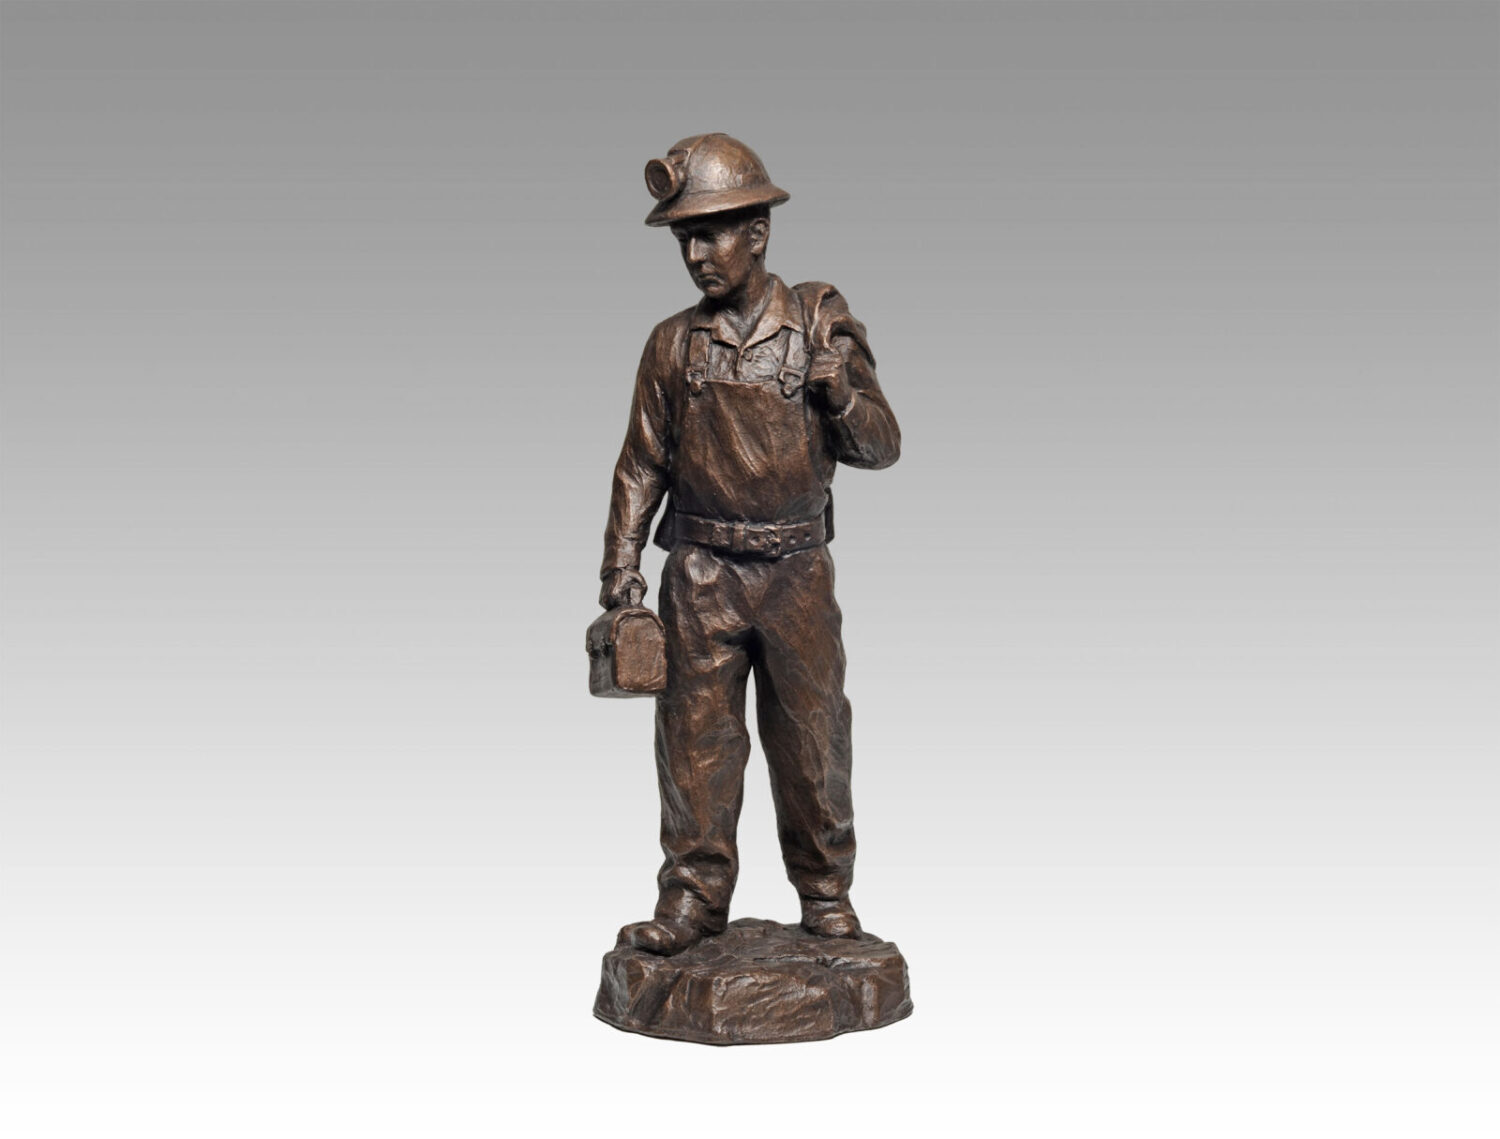 Gallery, Hardrock Man, $250 CAD, Metal Infused, 14” H, Edition 80, Mining Sculpture of a Male miner coming off shift, Sculptor Tyler Fauvelle